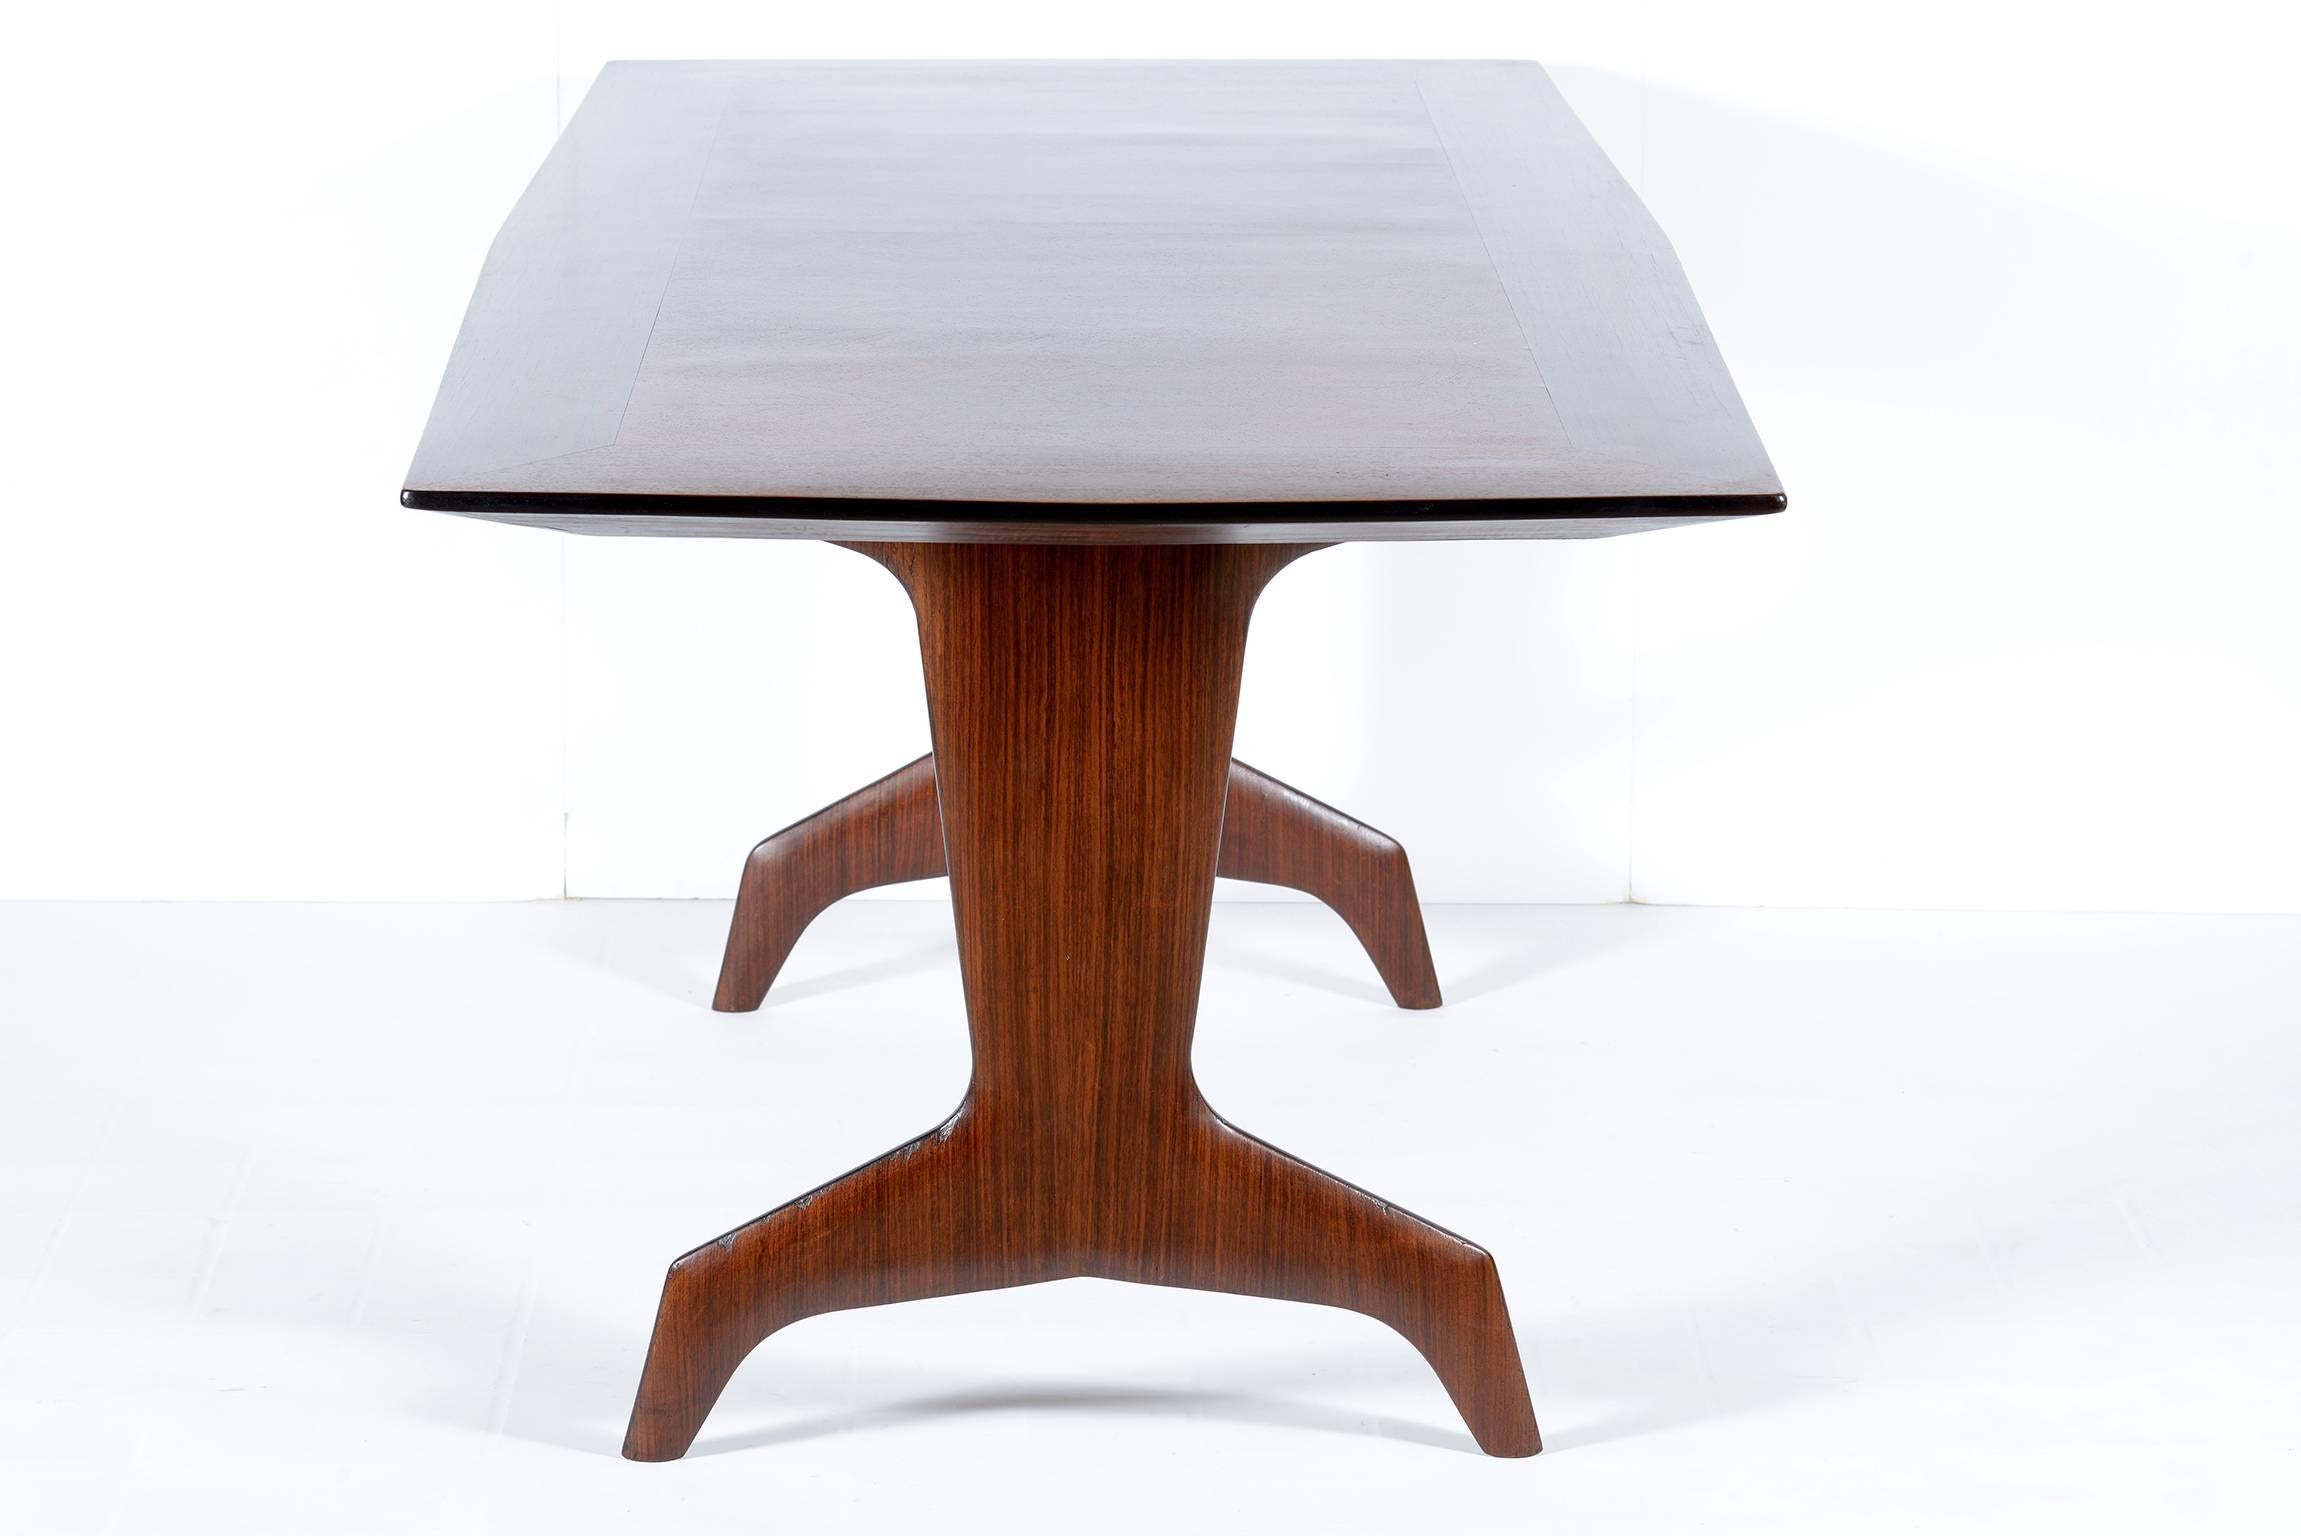 Stylish legs and interesting shaped precious wood  inlaid top for this elegant table that can be used like dining or consolle table or writing desk.